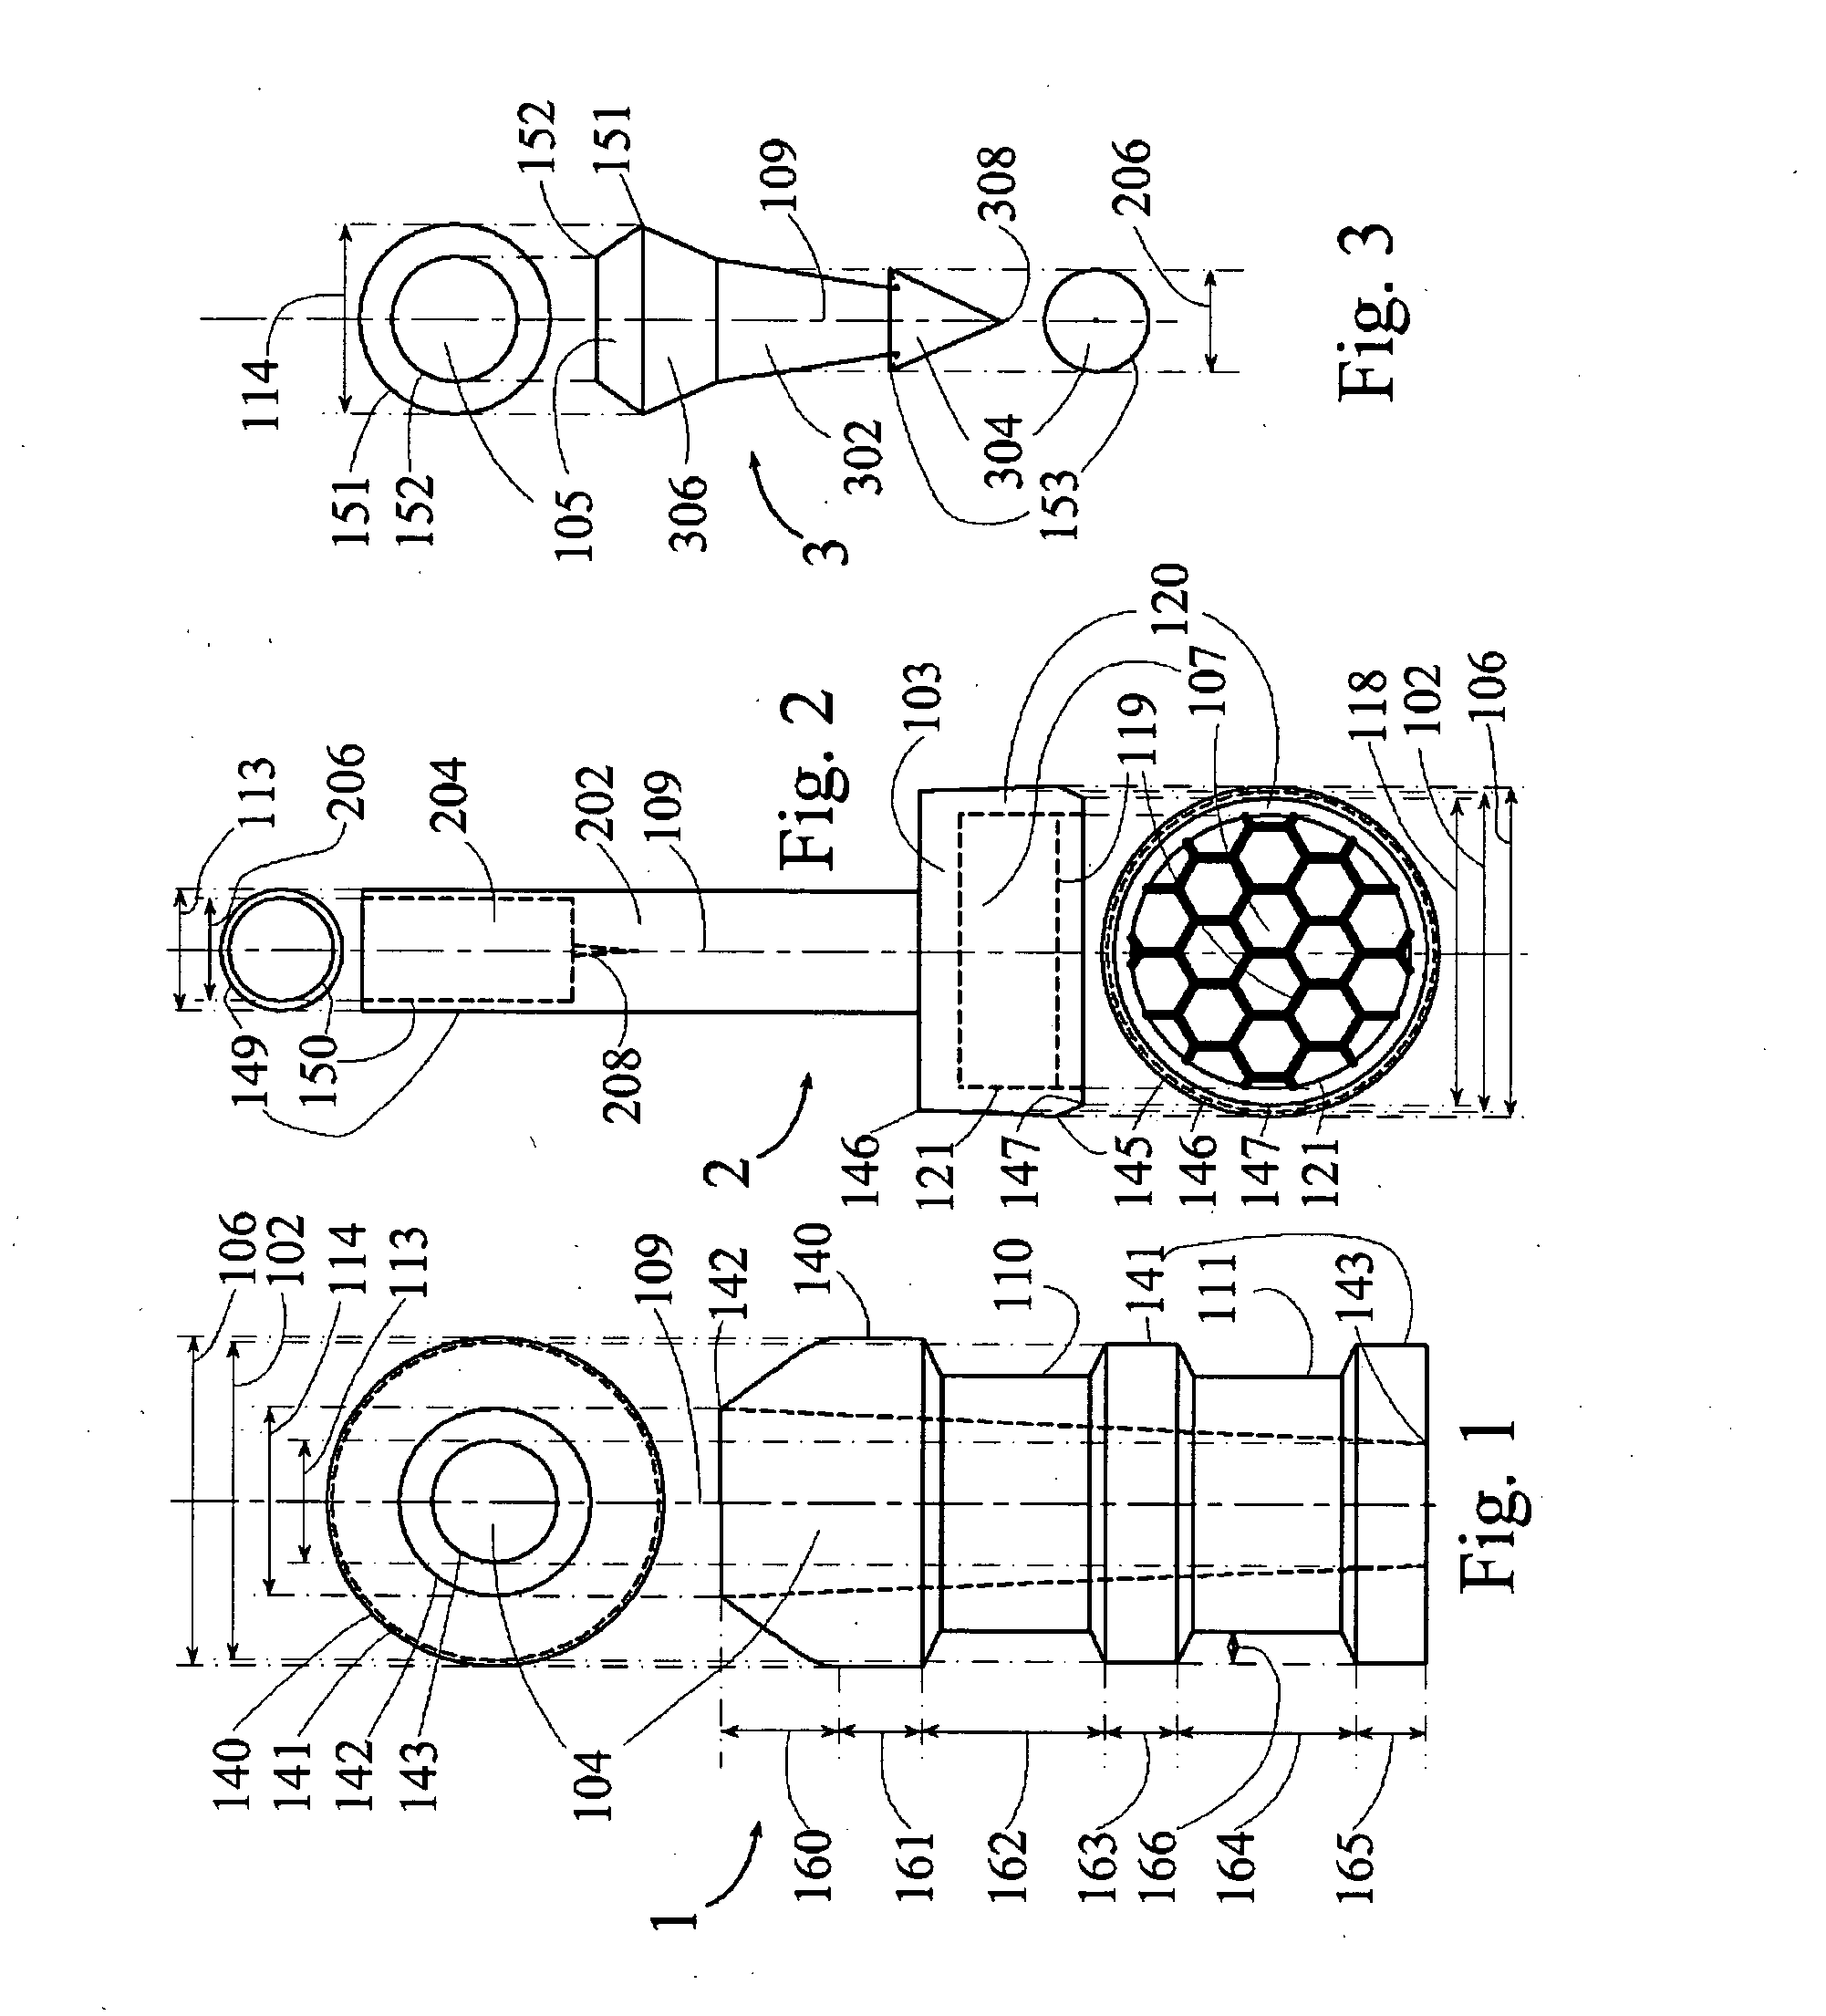 Firearm projectile apparatus, method, and product by process